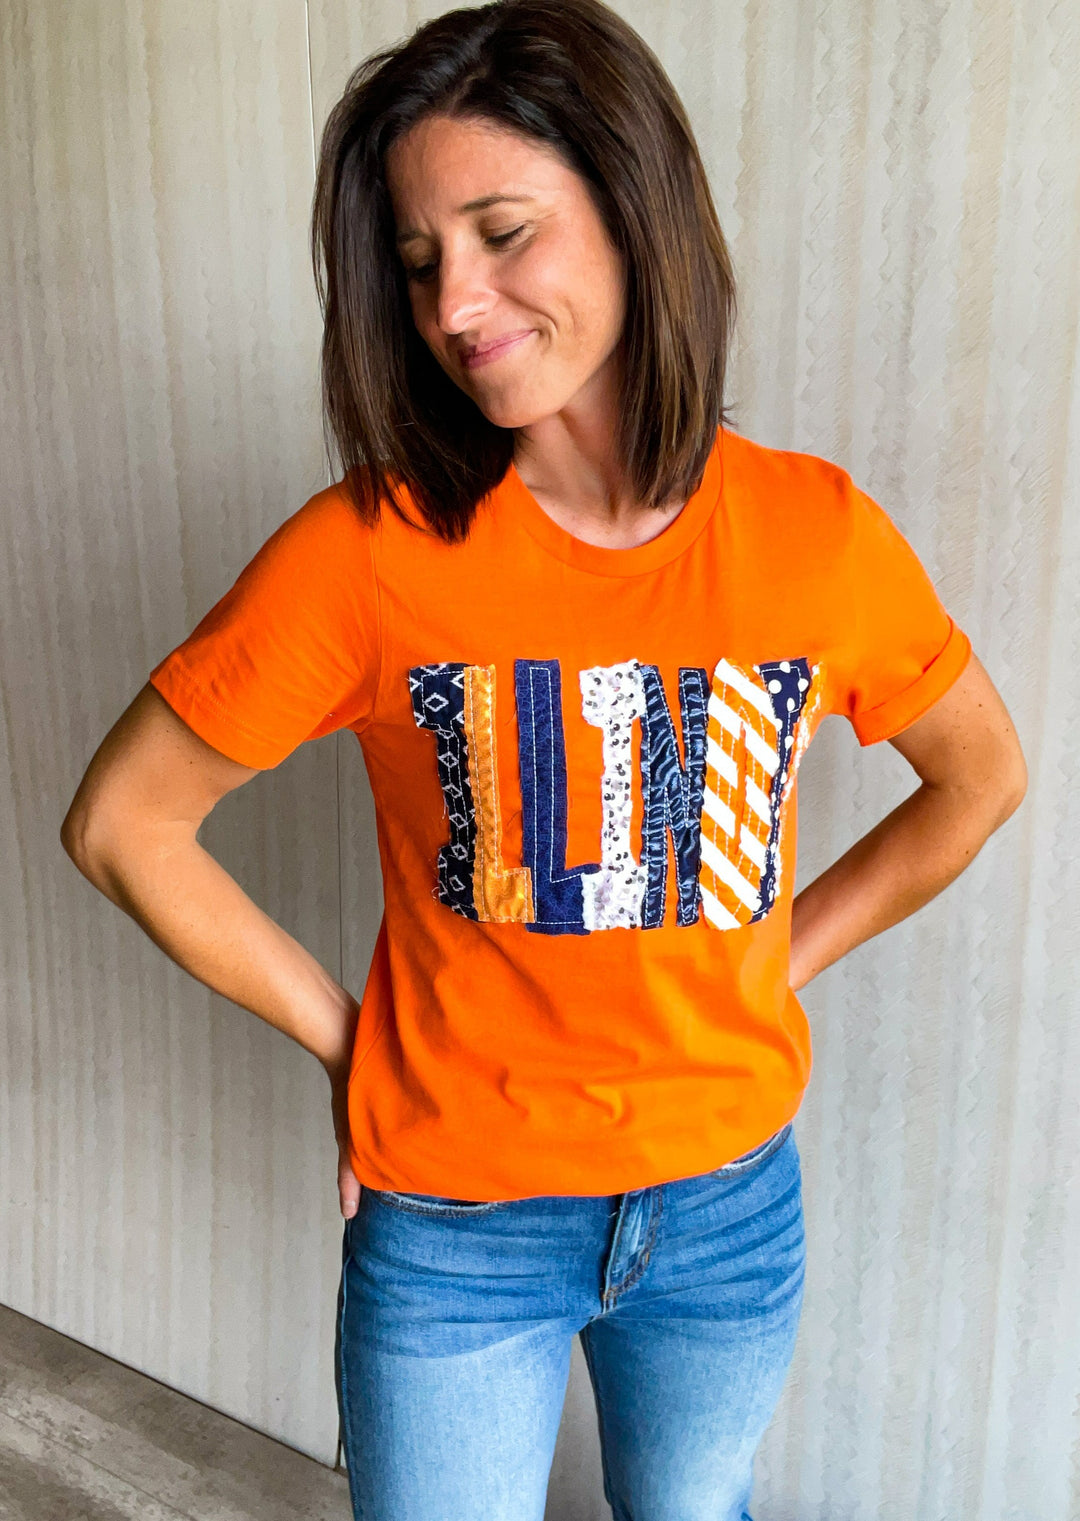 Orange Illinois T-shirt with navy, orange, and white sparkly letters.